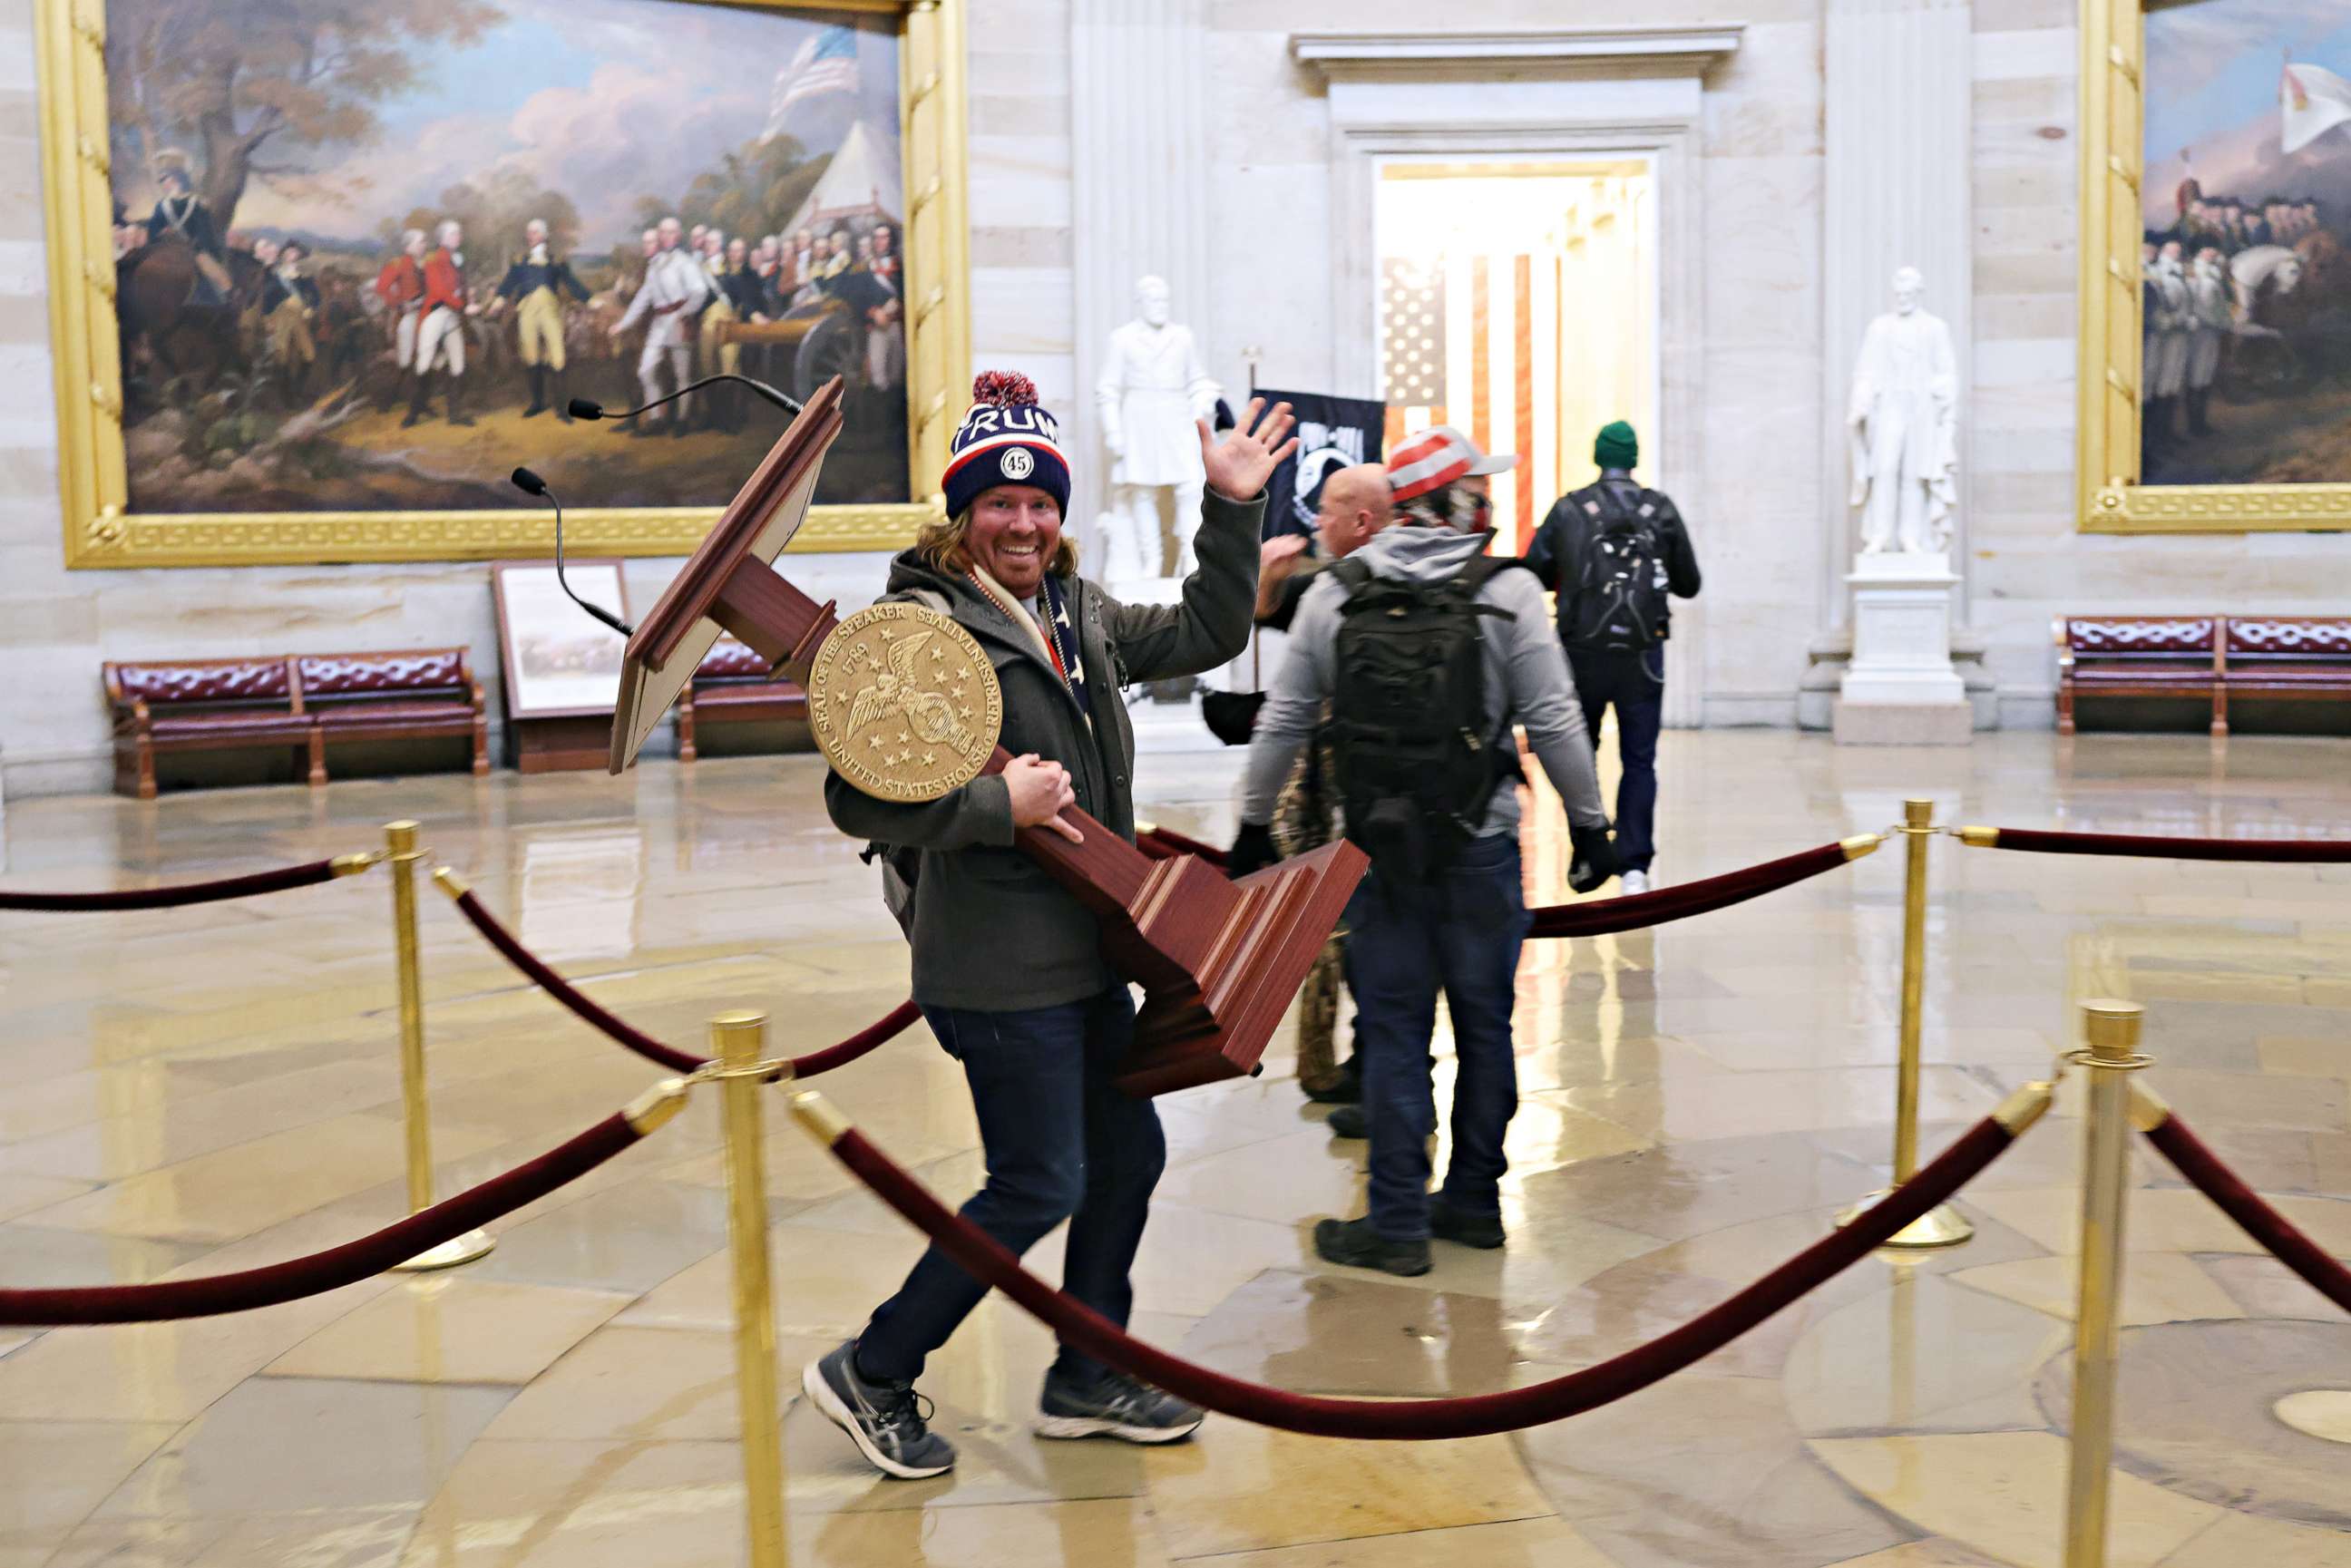 PHOTO: Protesters enter the U.S. Capitol Building on Jan. 06, 2021, in Washington, D.C. Adam Johnson is being held Pinellas County Jail.